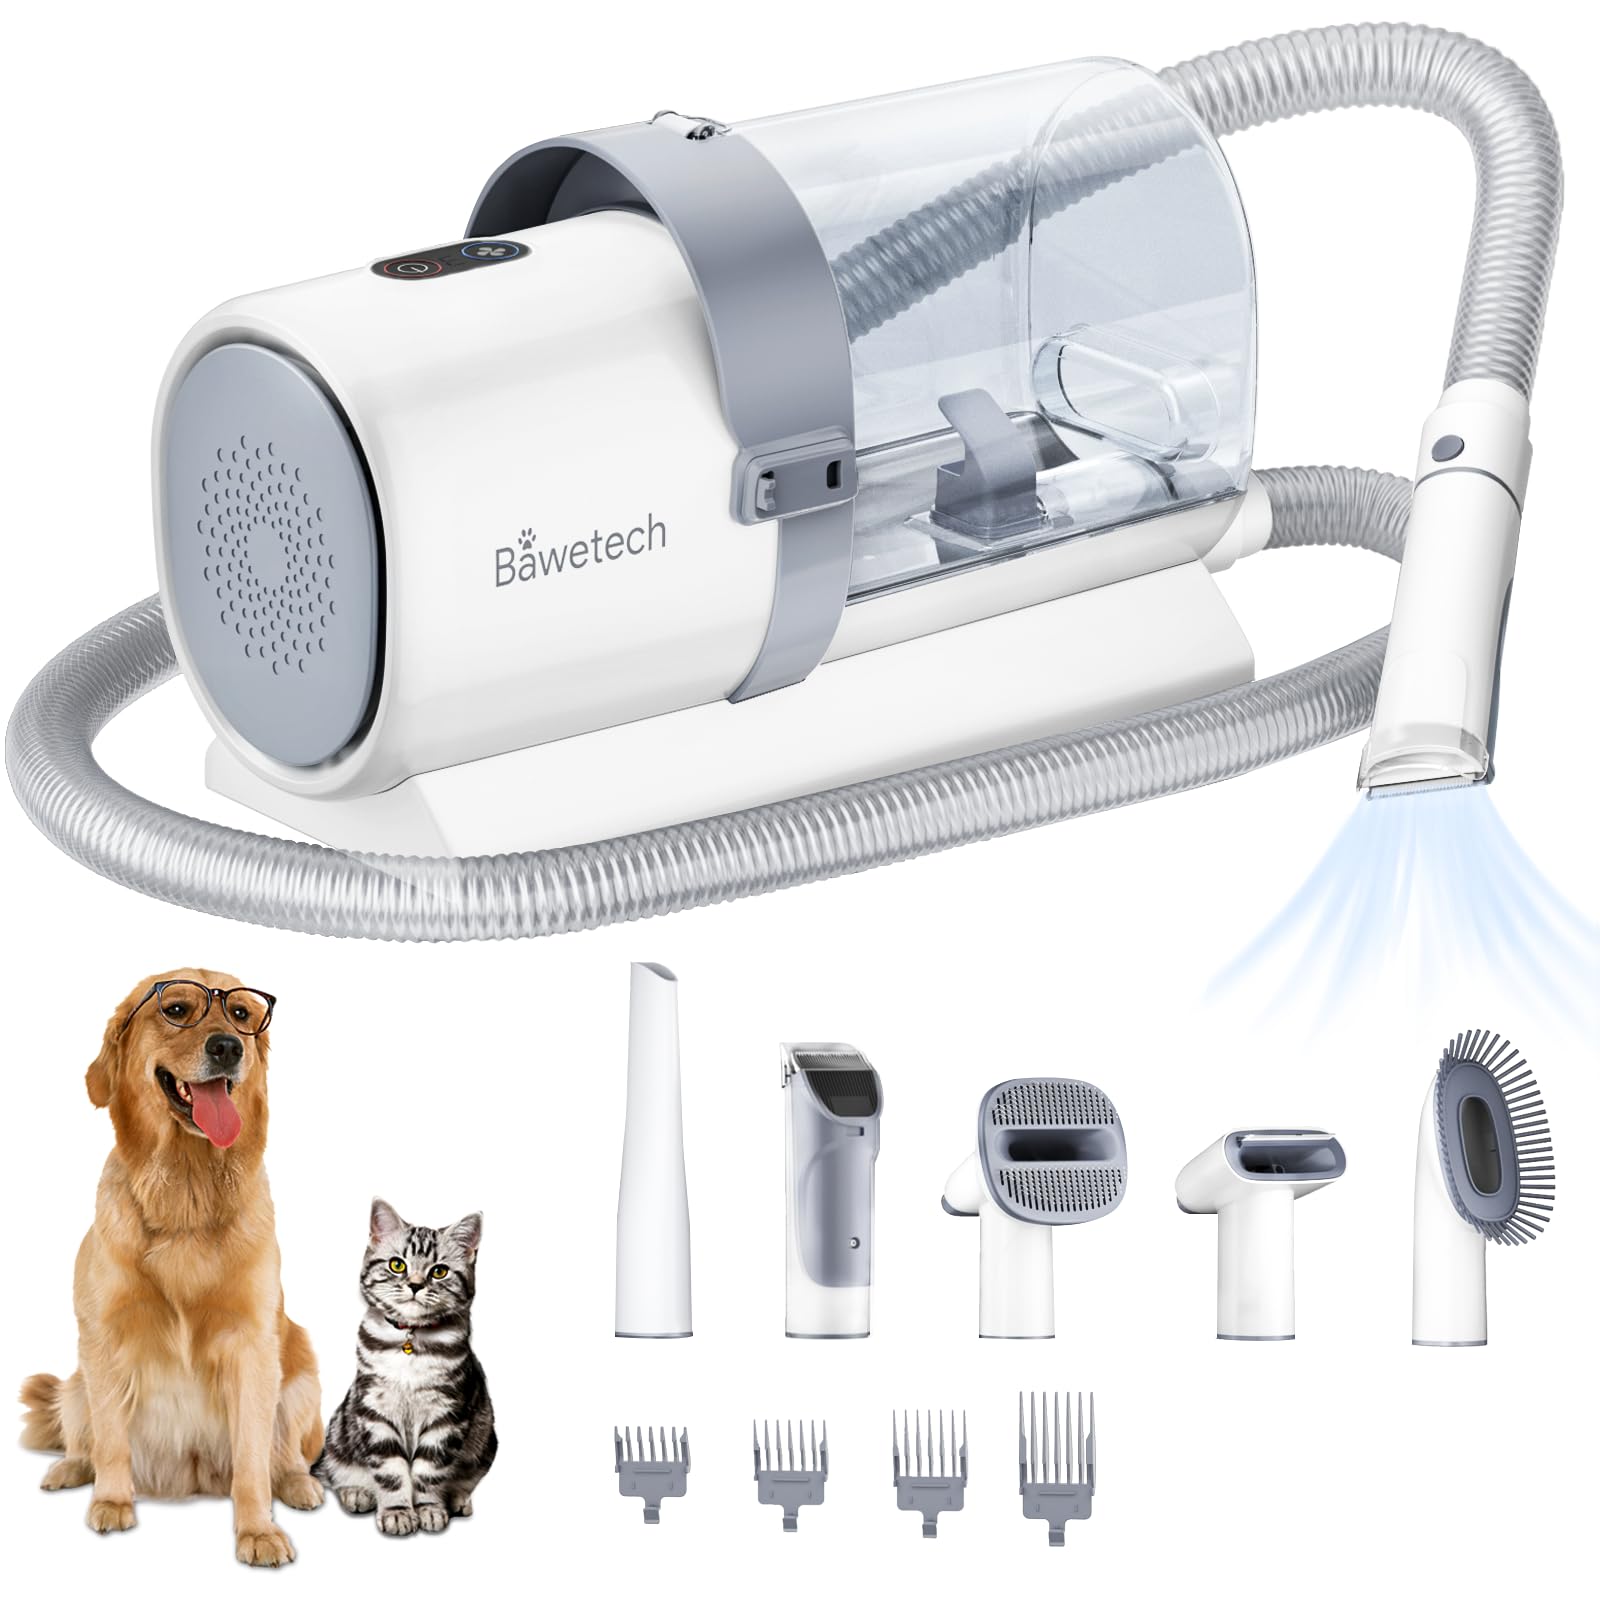 You are currently viewing Bawetech Dog Clipper Grooming Kit and Vacuum Review